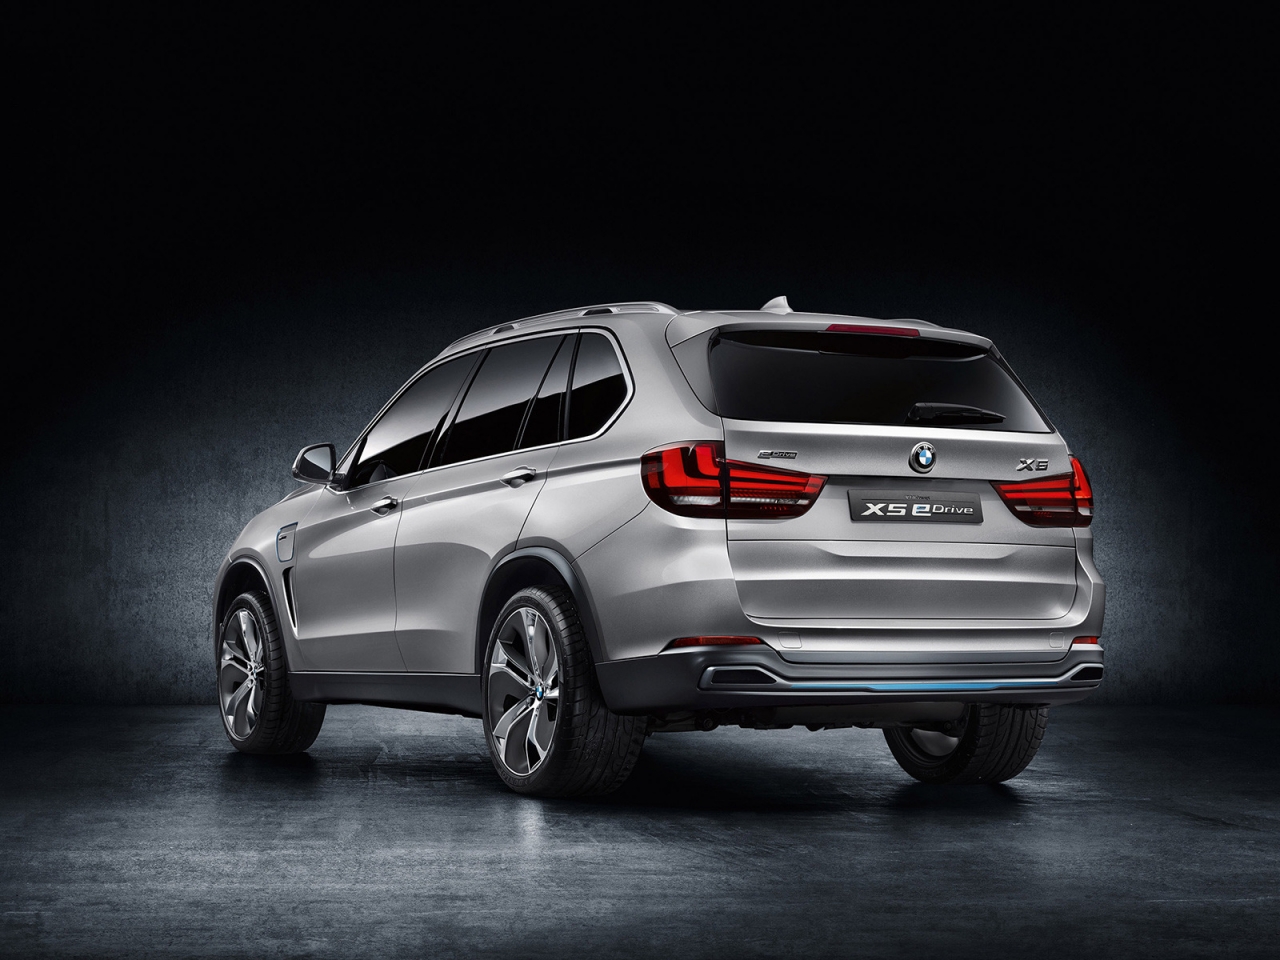 BMW X5 eDrive Concept Rear for 1280 x 960 resolution